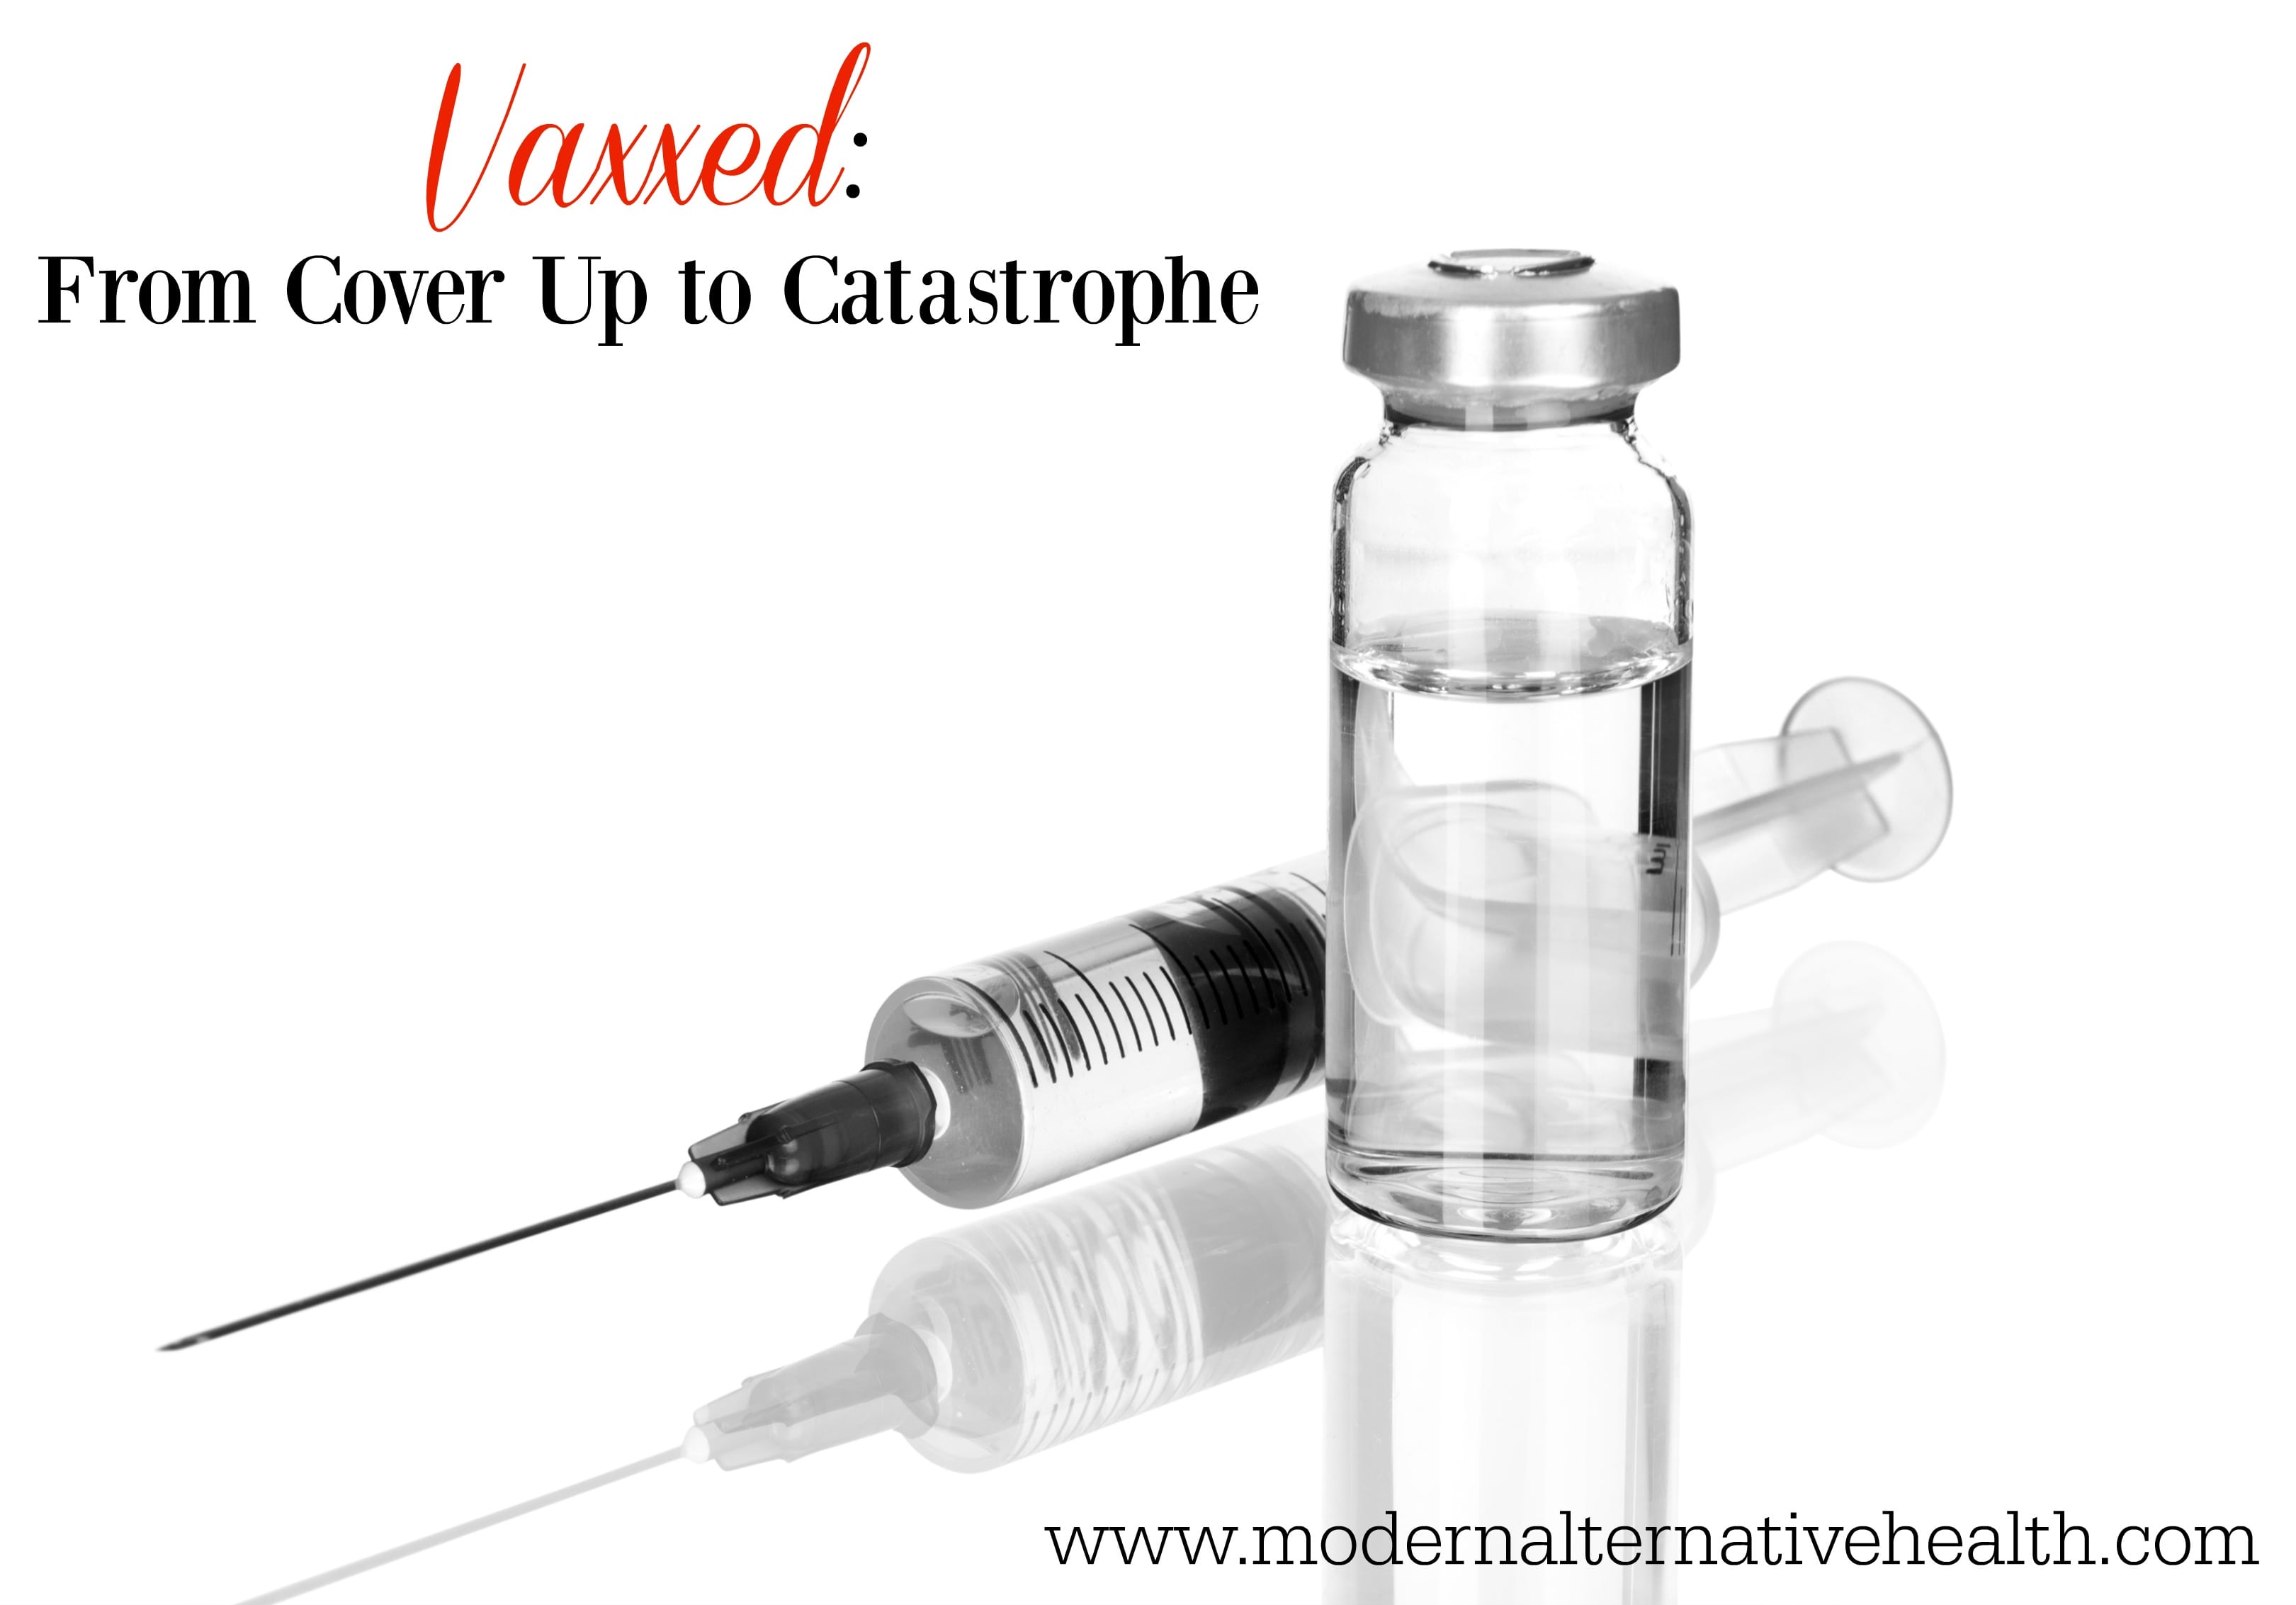 Vaxxed From Cover Up to Catastrophe